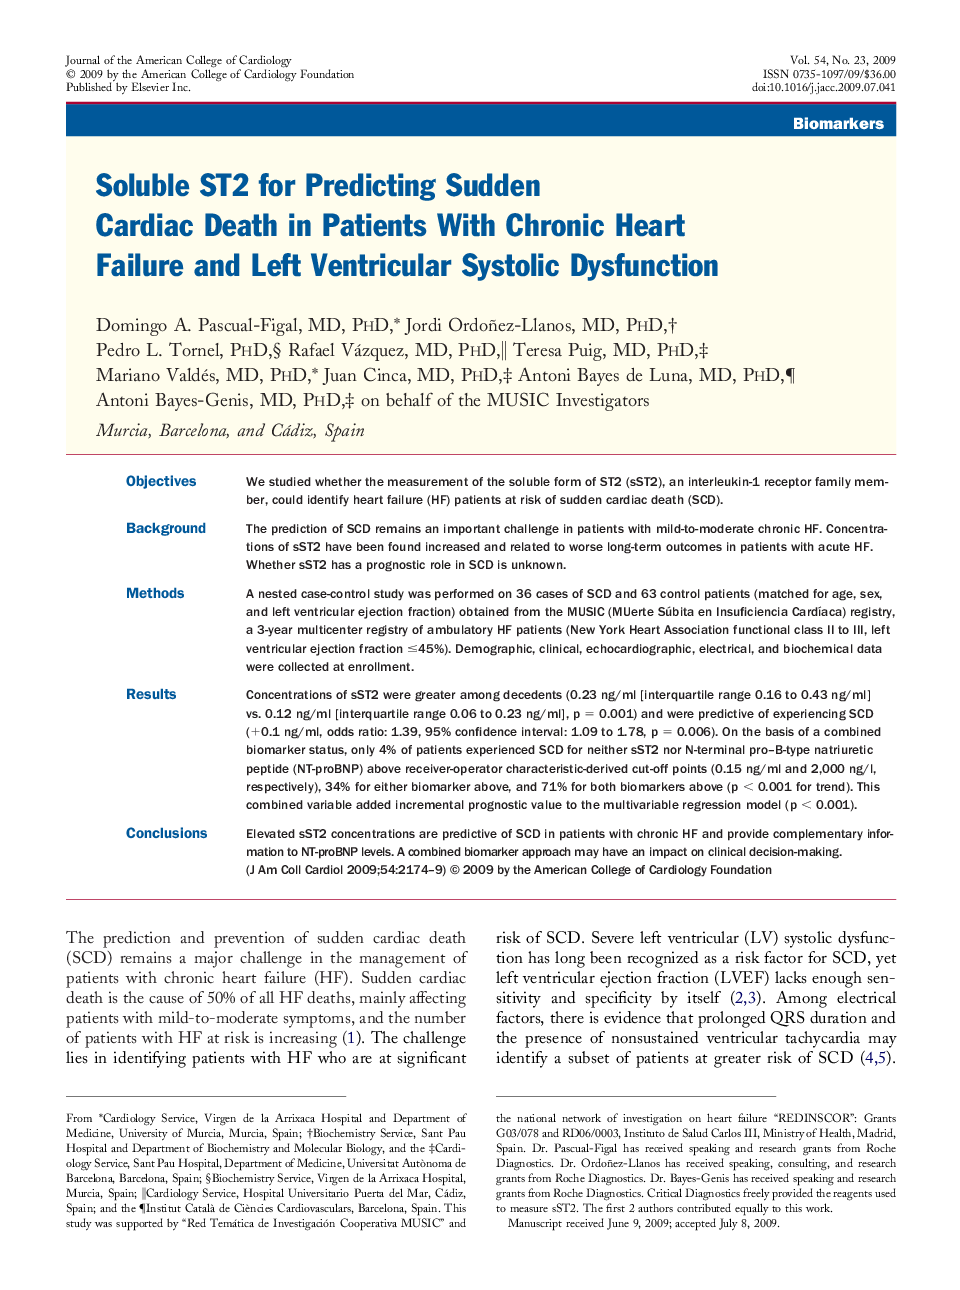 Soluble ST2 for Predicting Sudden Cardiac Death in Patients With Chronic Heart Failure and Left Ventricular Systolic Dysfunction 